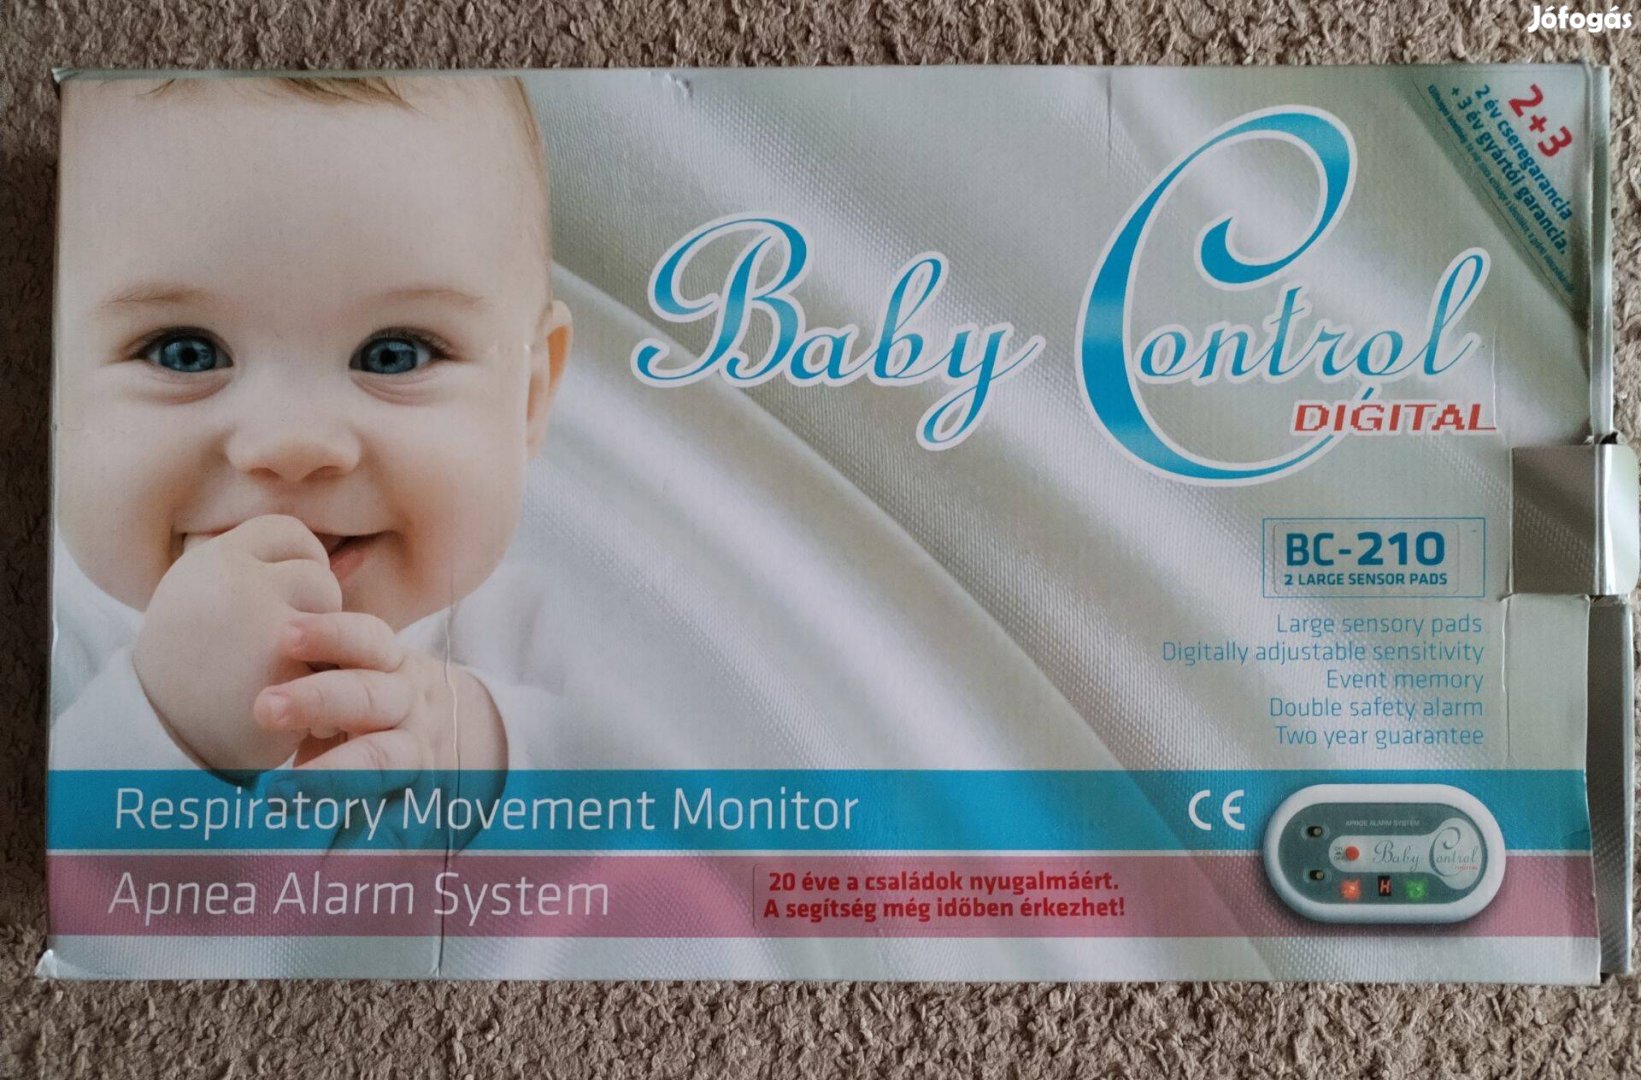 Baby Controll BC-210